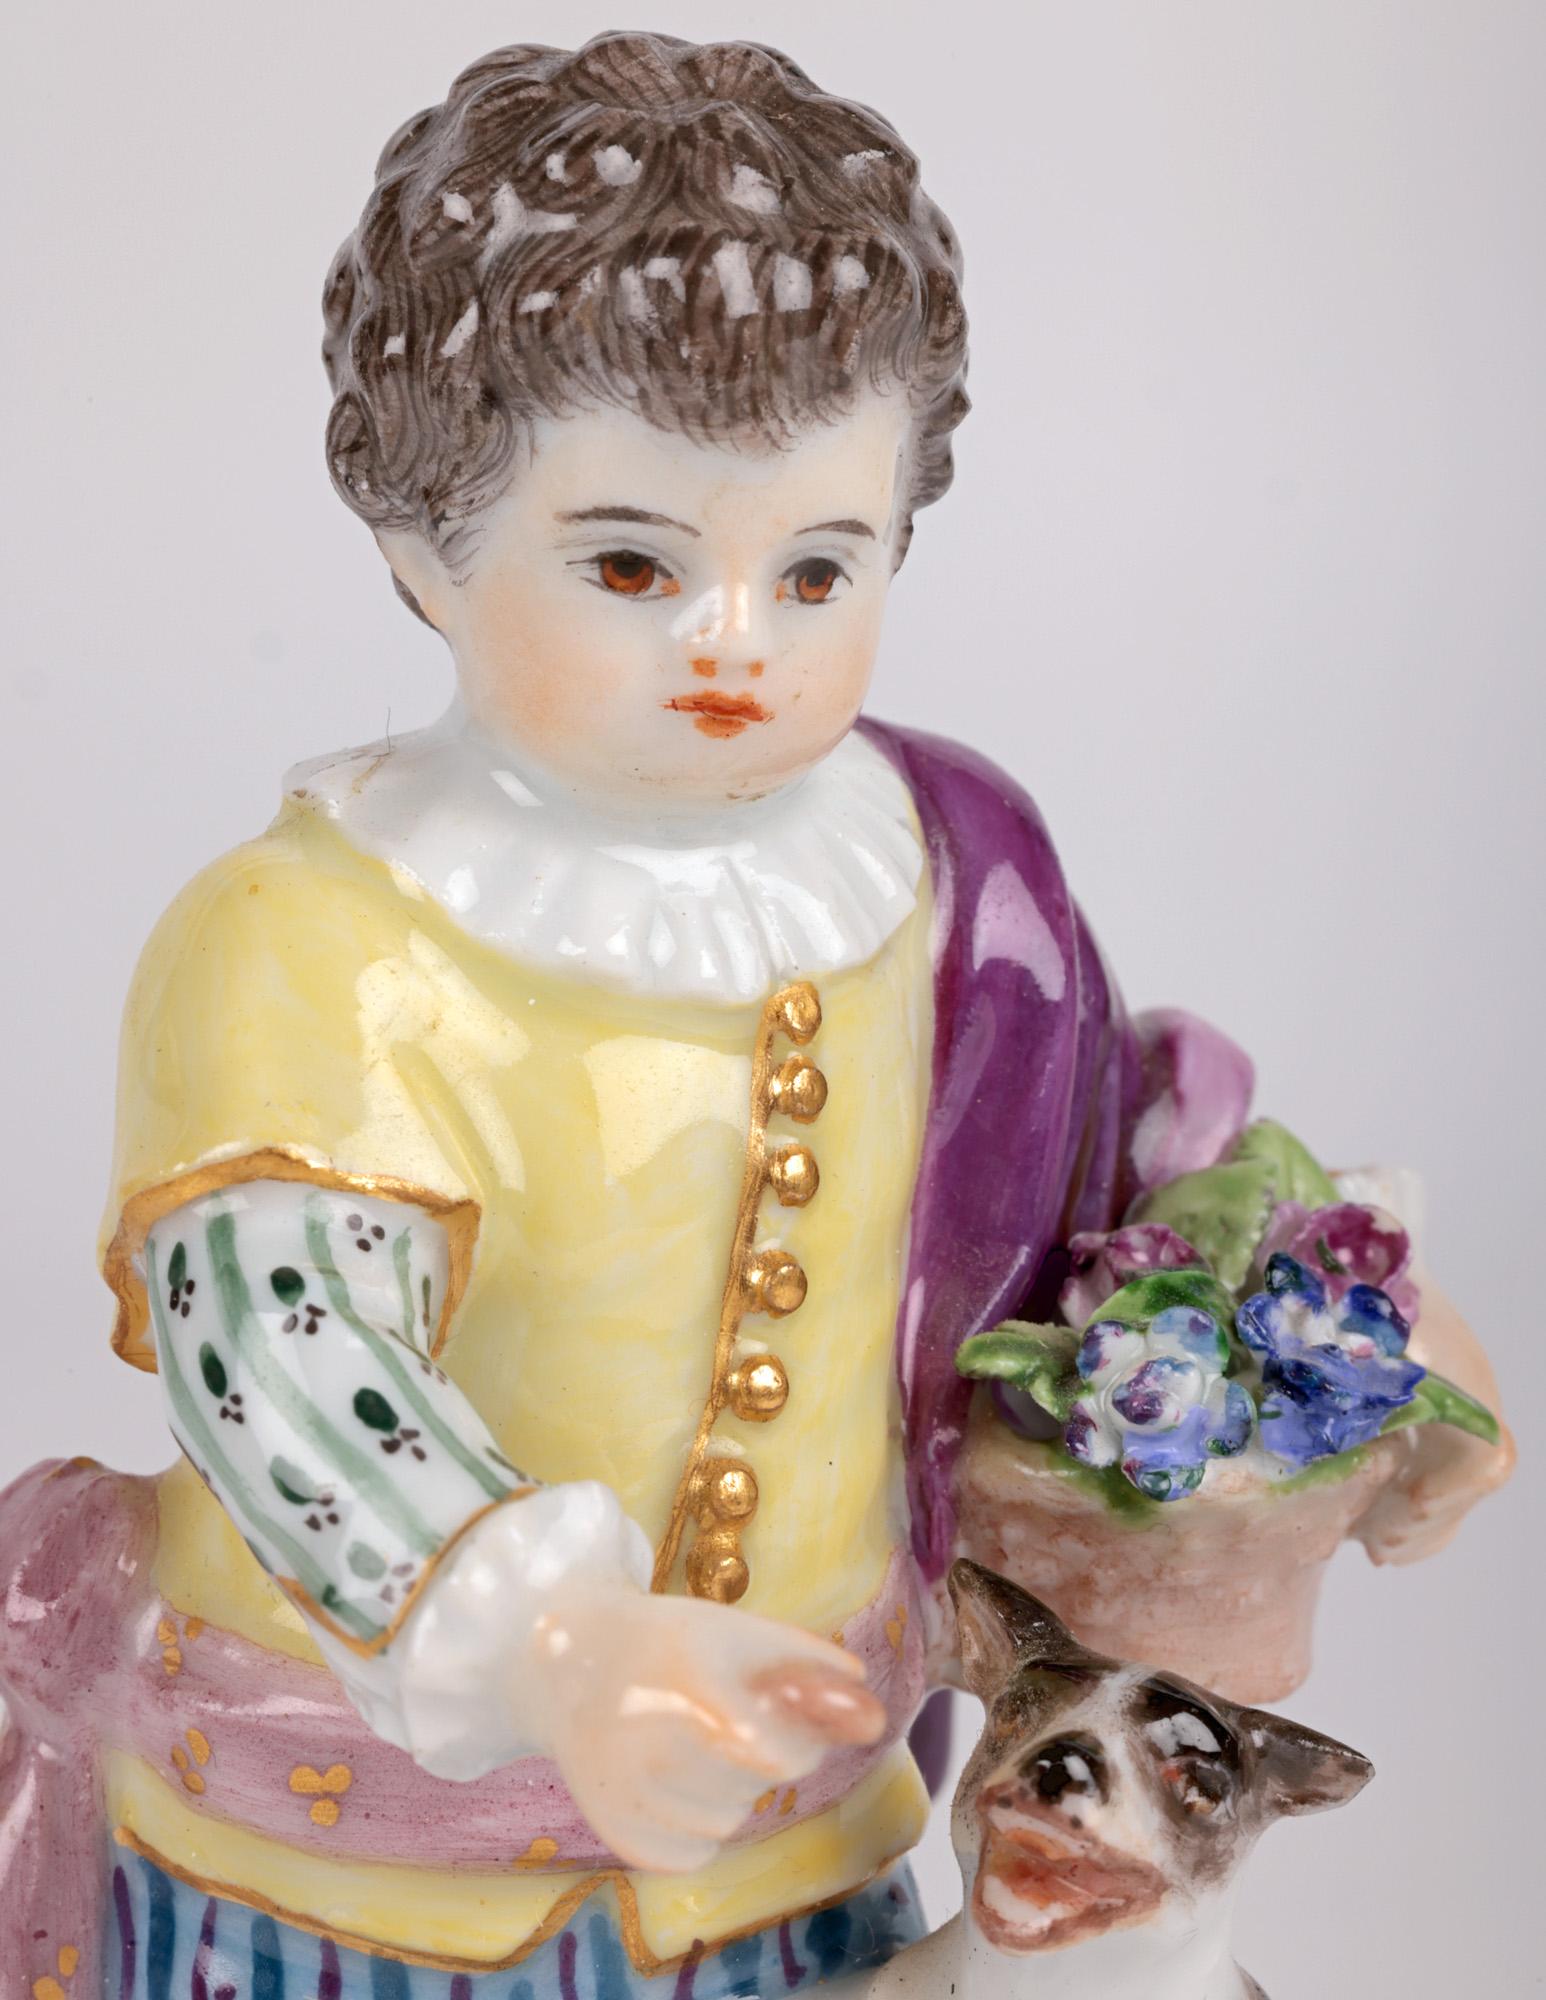 A fine antique German porcelain figure of a boy with a dog by world renowned makers Meissen and dating from the 19th century. The figure of a young boy in typical period dress stands mounted on a small square pedestal base and holds a basket of